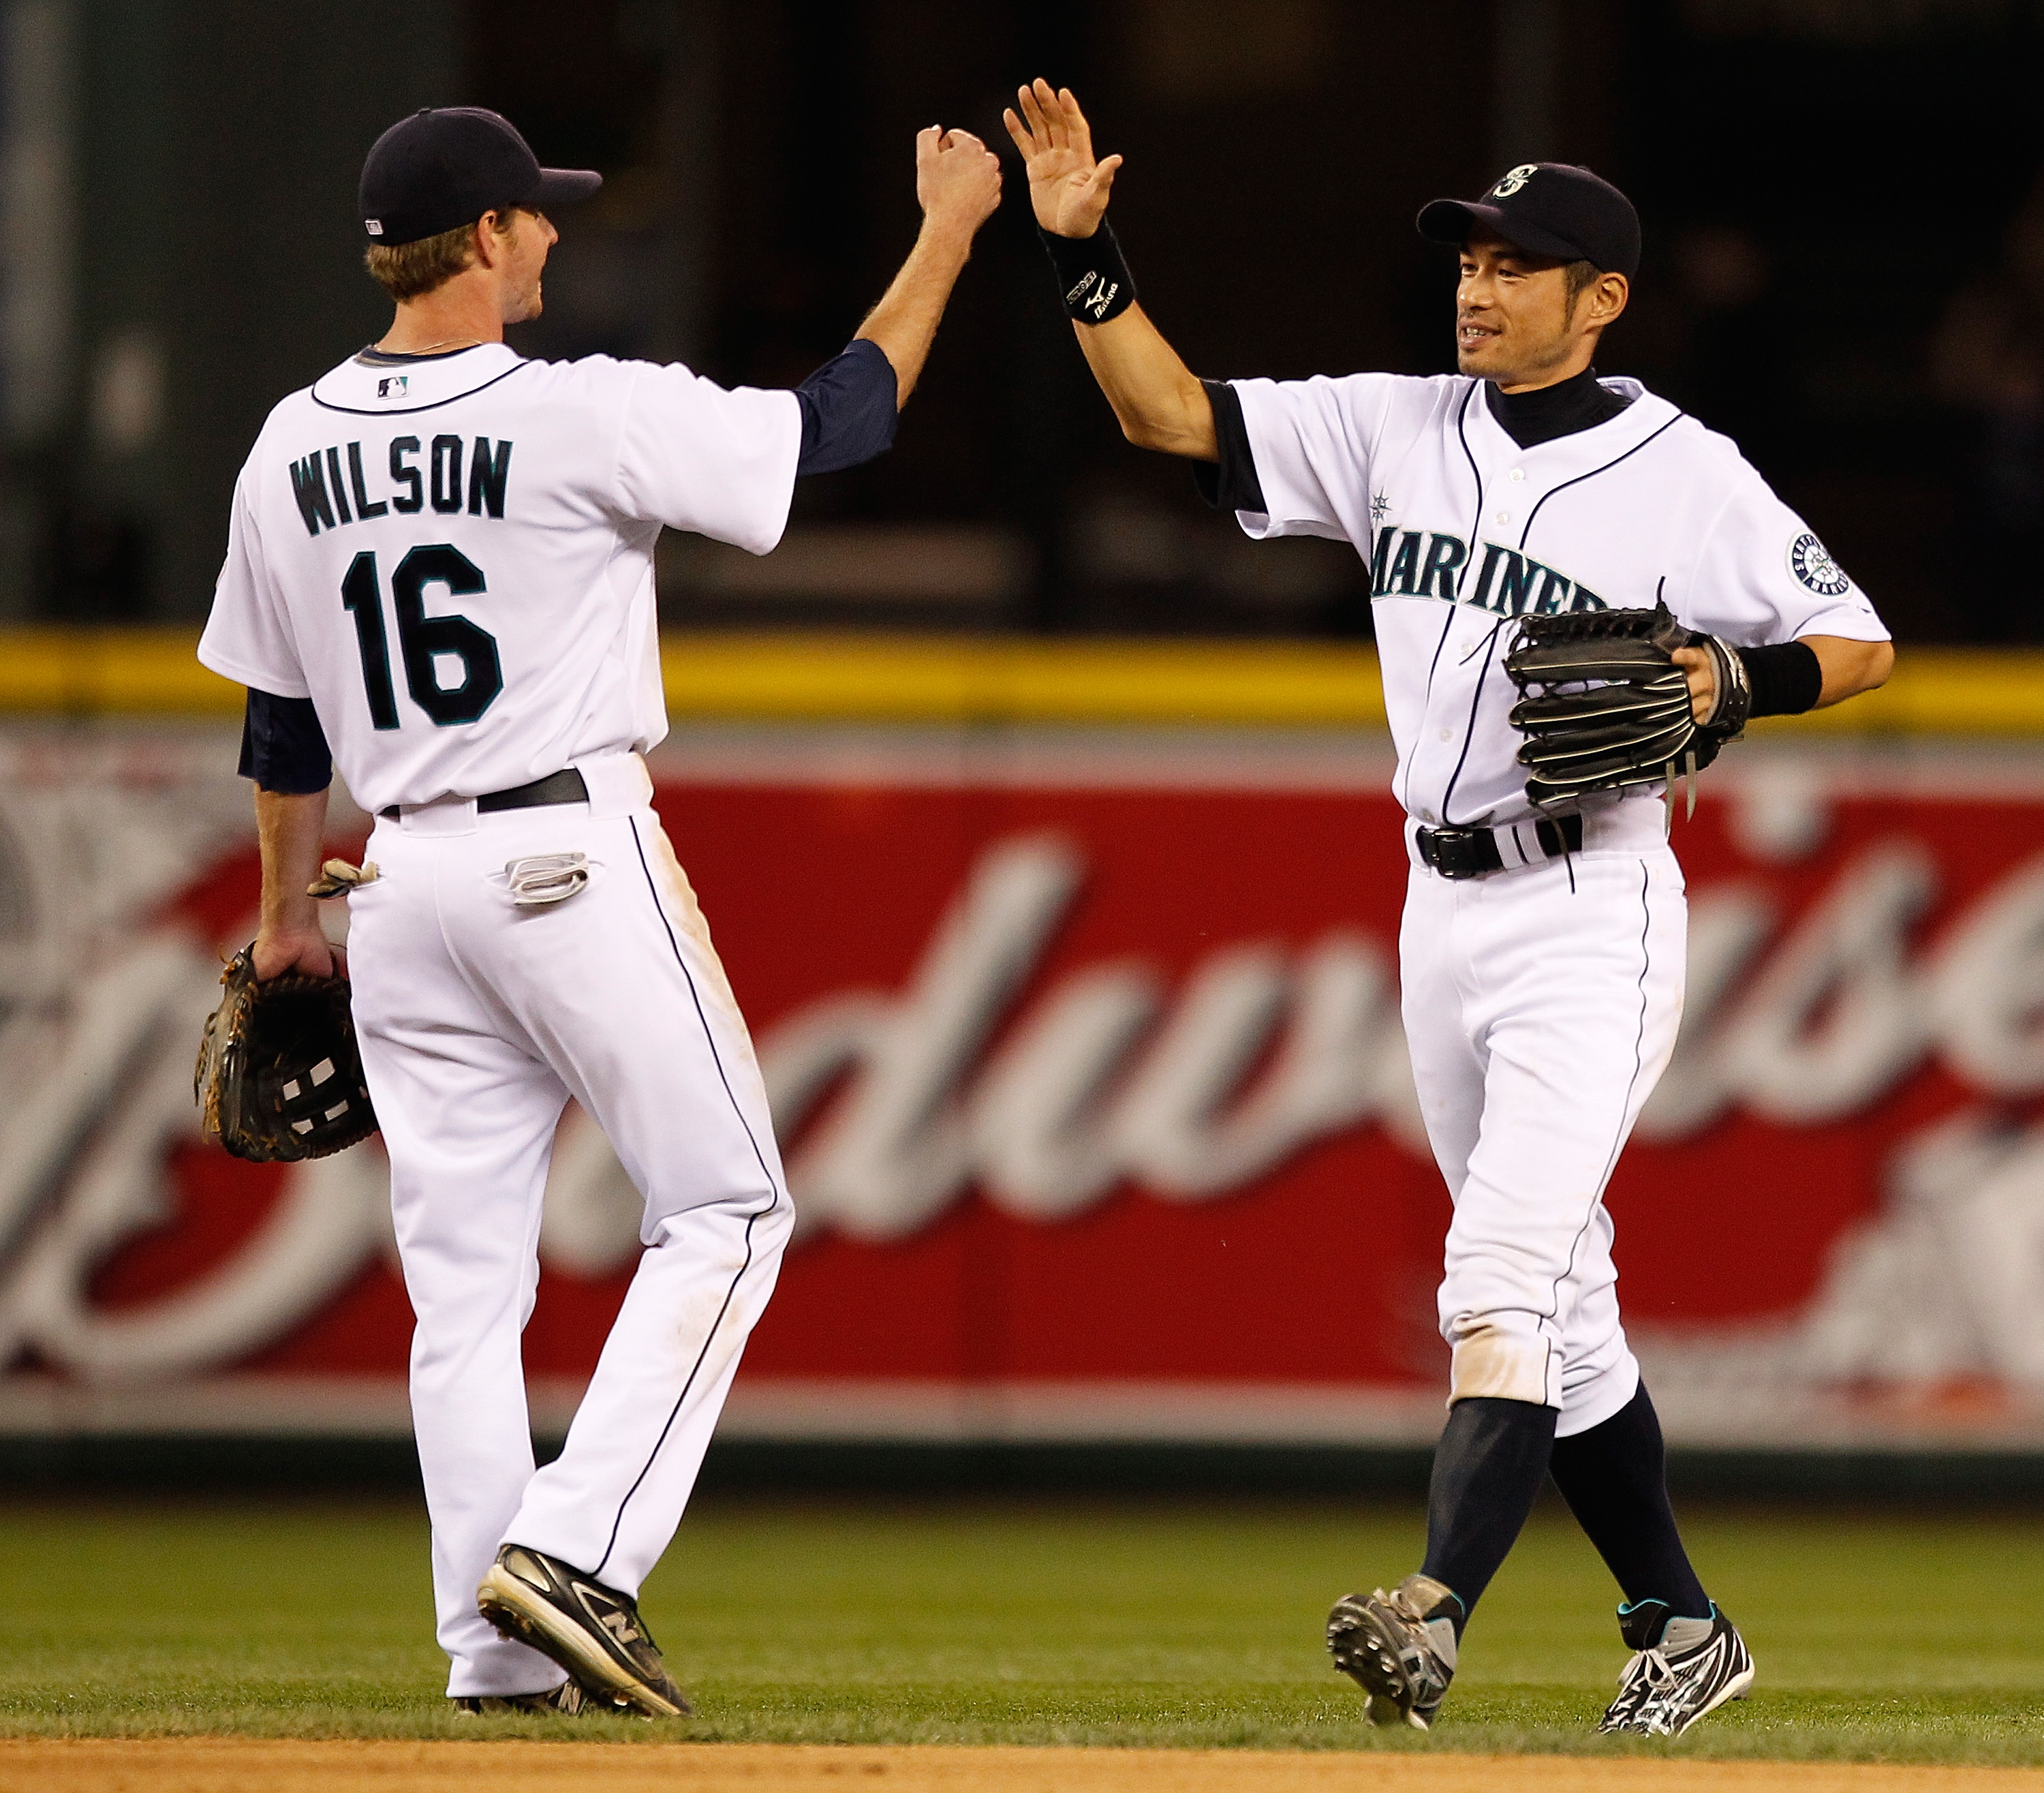 SEATTLE - JUNE 22:  Ichiro Suzuki #51 of the Seattle Mariners celebrates with Josh Wilson #16 after defeating the Chicago Cubs 2-0 on June 22, 2010 at Safeco Field in Seattle, Washington. (Photo by Otto Greule Jr/Getty Images)